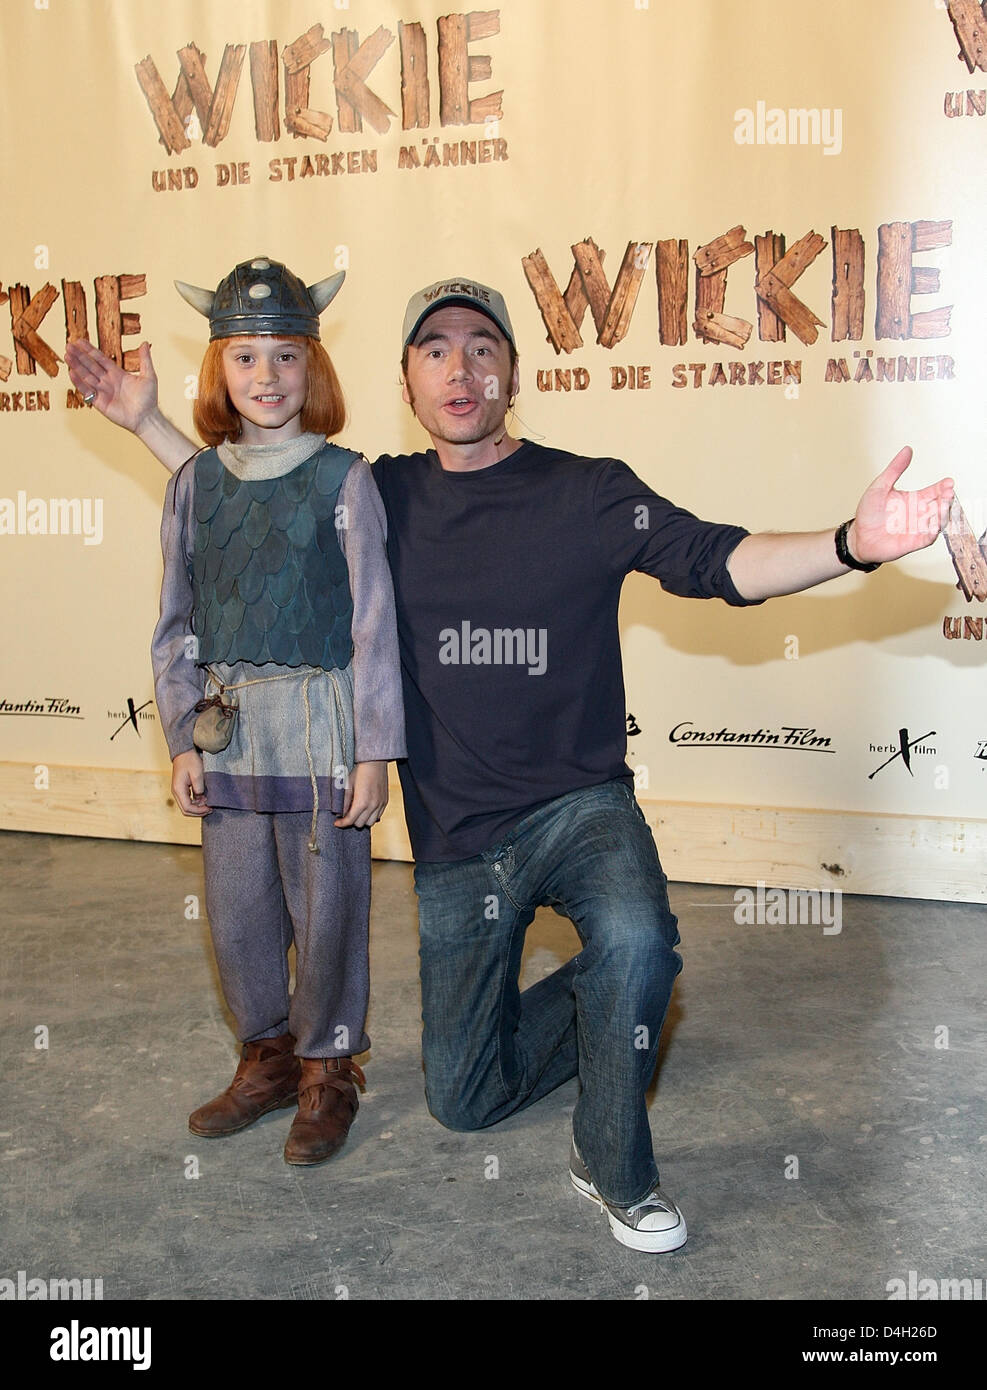 Actor Jonas Haemmerle (L) and director Michael Bully Herbig pose during a photo call at a film studio in Munich, Germany, 31 July 2008. Haemmerle stars as Viking boy 'Wickie' in the motion picture 'Wickie und die starken Maenner' ('Vicky the Viking') directed by Michael Bully Herbig. The movie is scheduled to kick off at German cinemas in 2009. Photo: URSUAL DUEREN Stock Photo